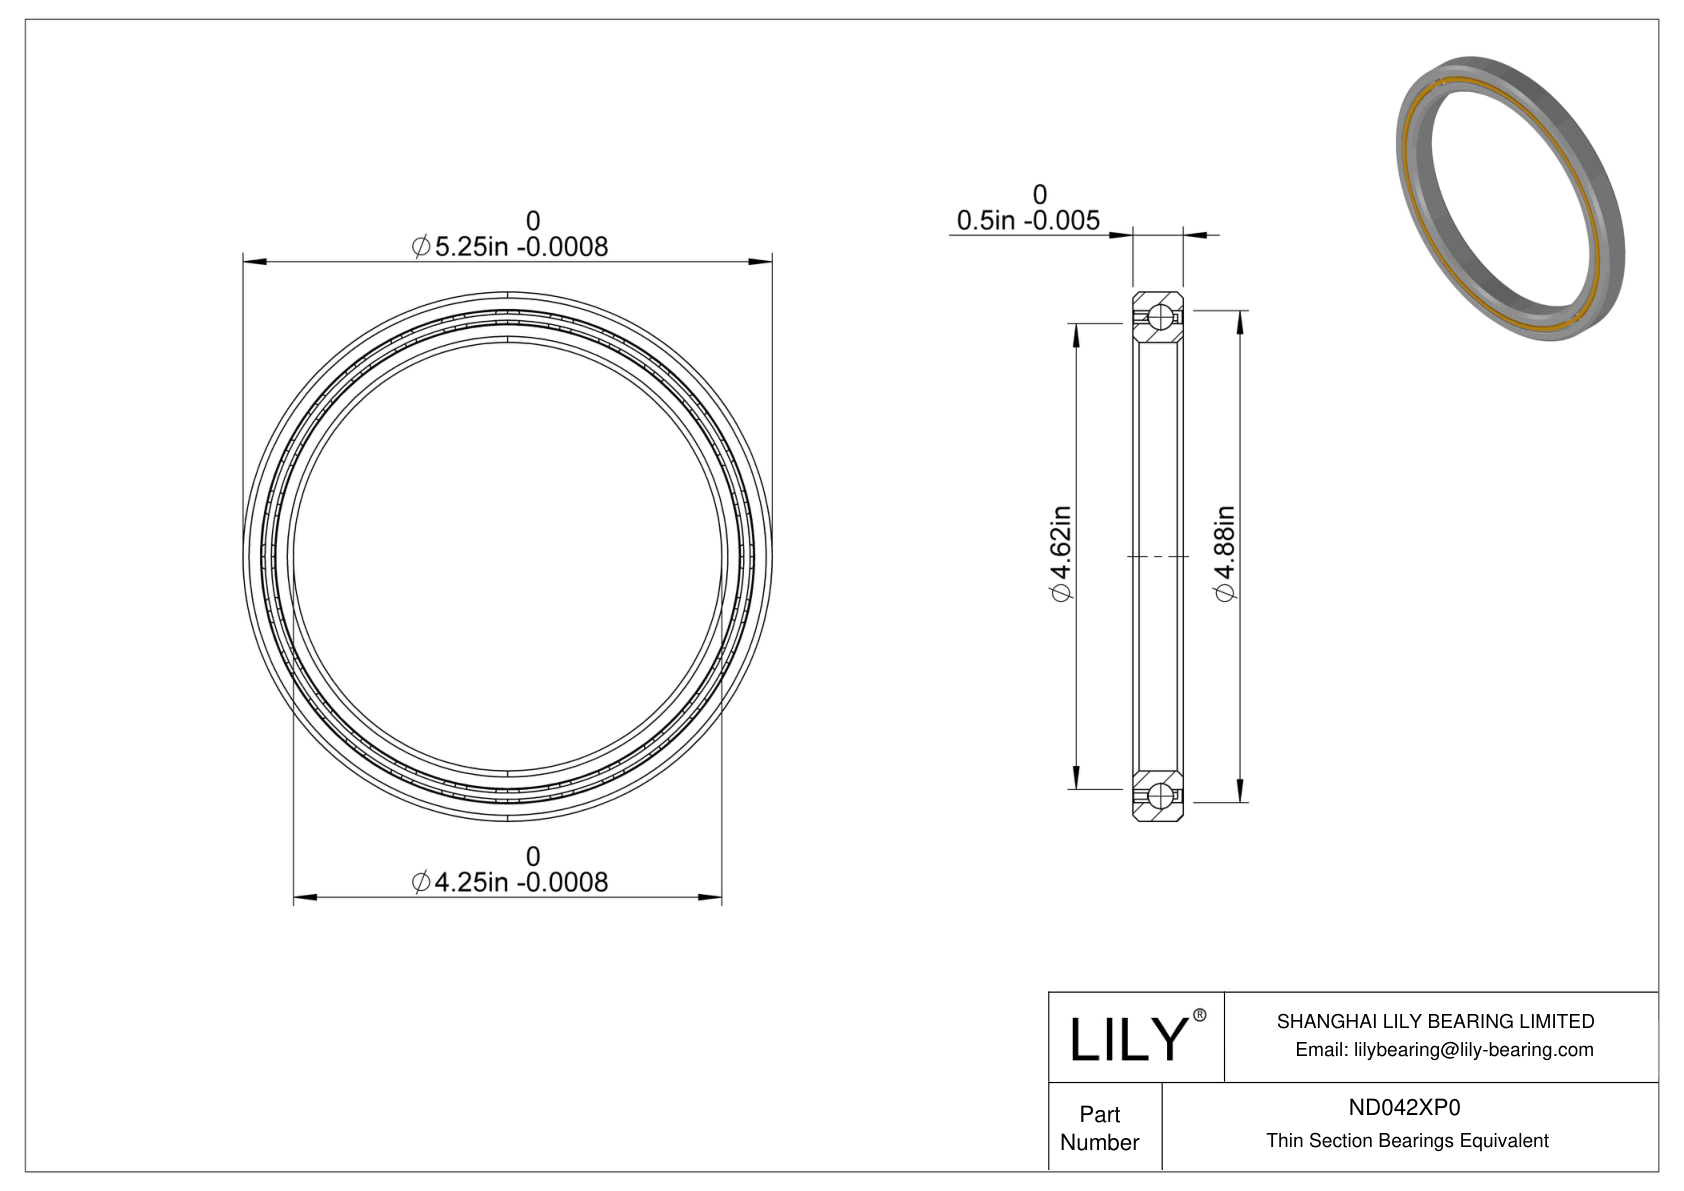 ND042XP0 Constant Section (CS) Bearings cad drawing